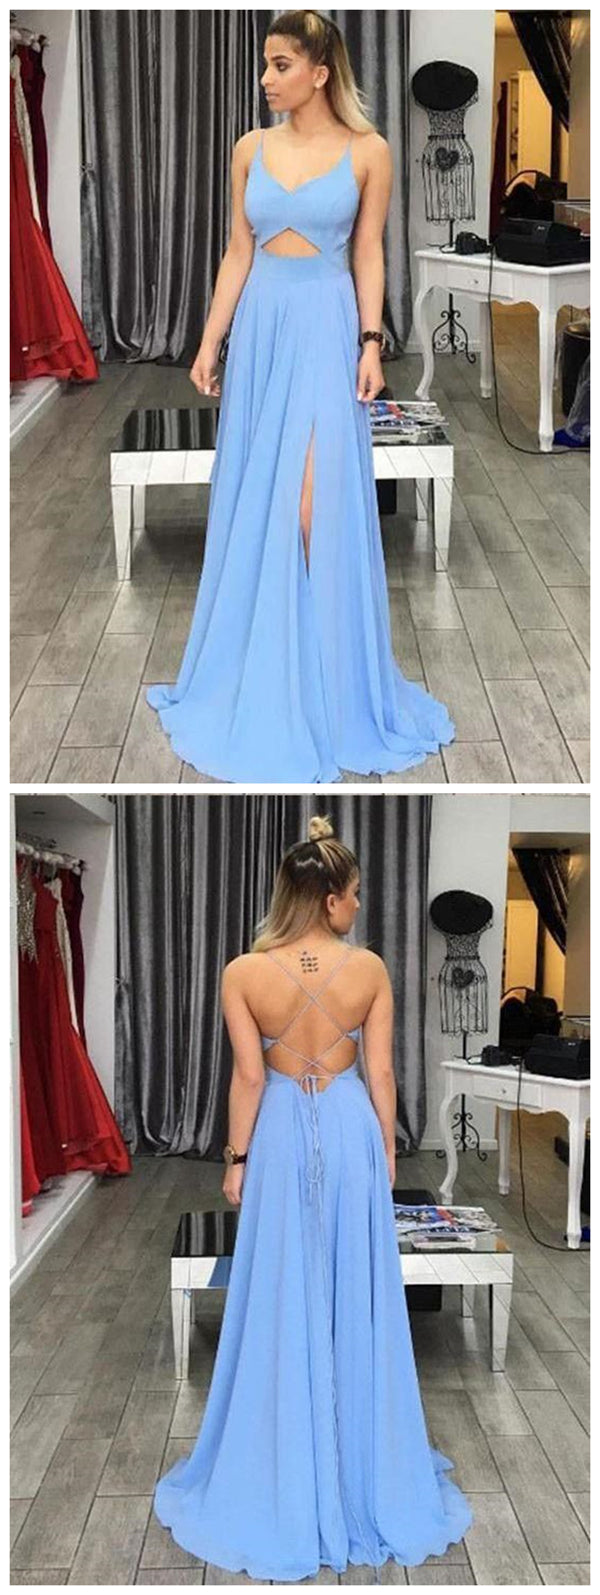 Blue Spaghetti Straps Prom Dresses With Side Slit, Sexy Long Evening Party Prom Dress